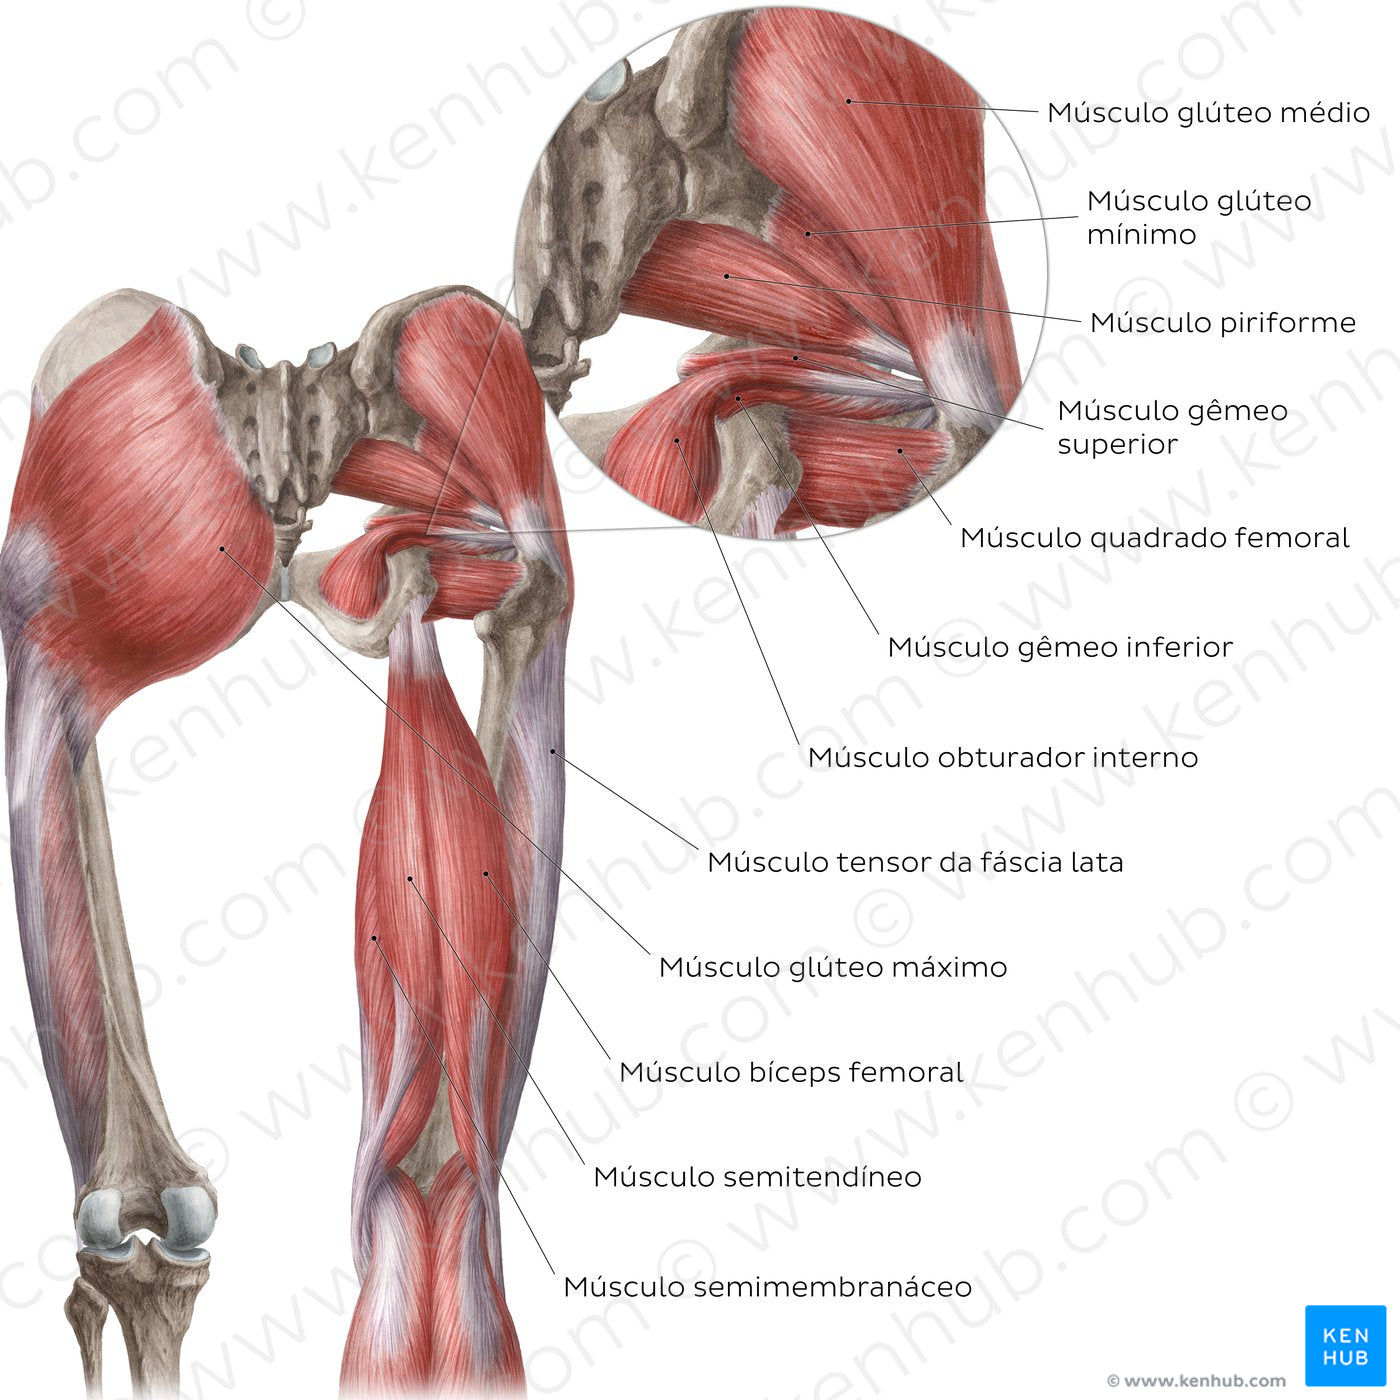 Muscles of the hip and thigh (Posterior view) (Portuguese)